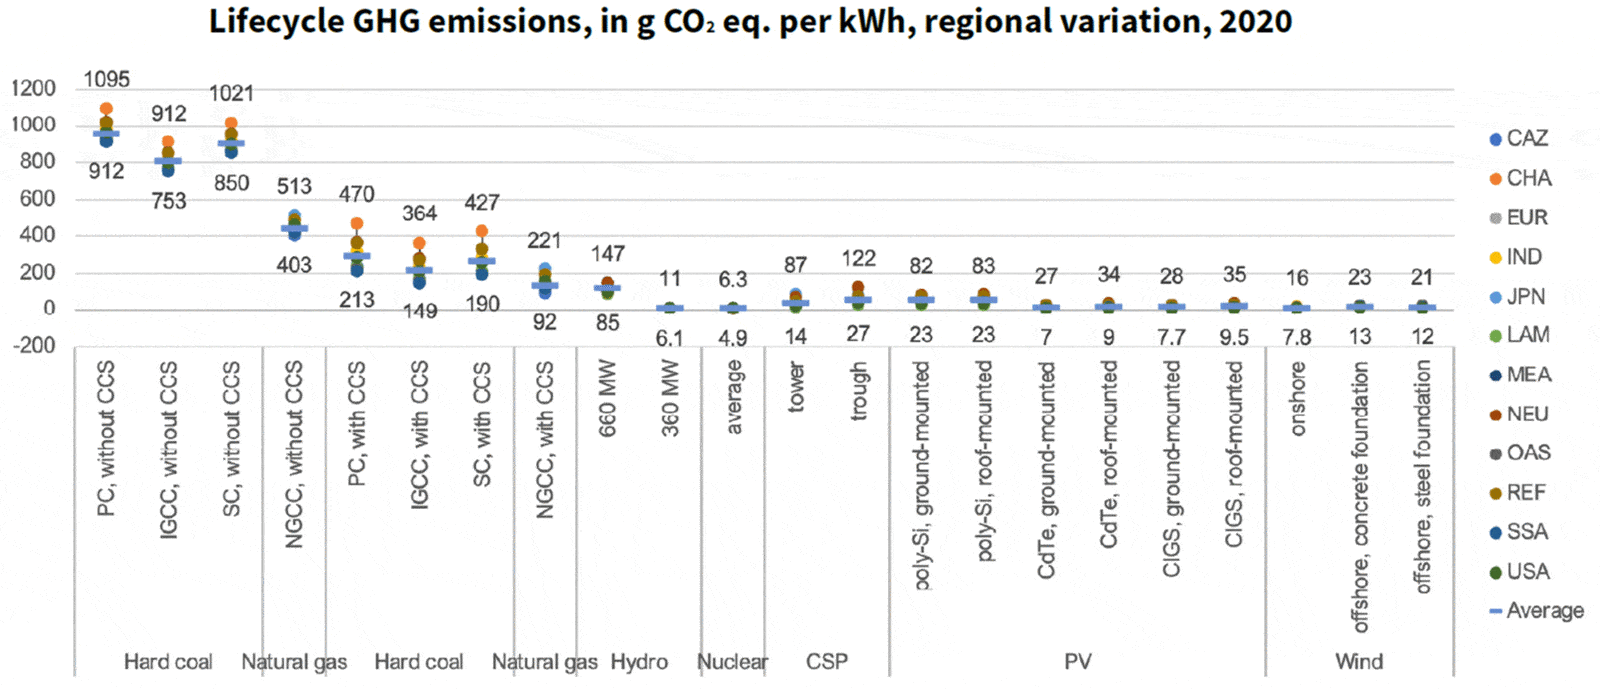 Lifecycle greenhouse gas emissions’ regional variations for the year 2020